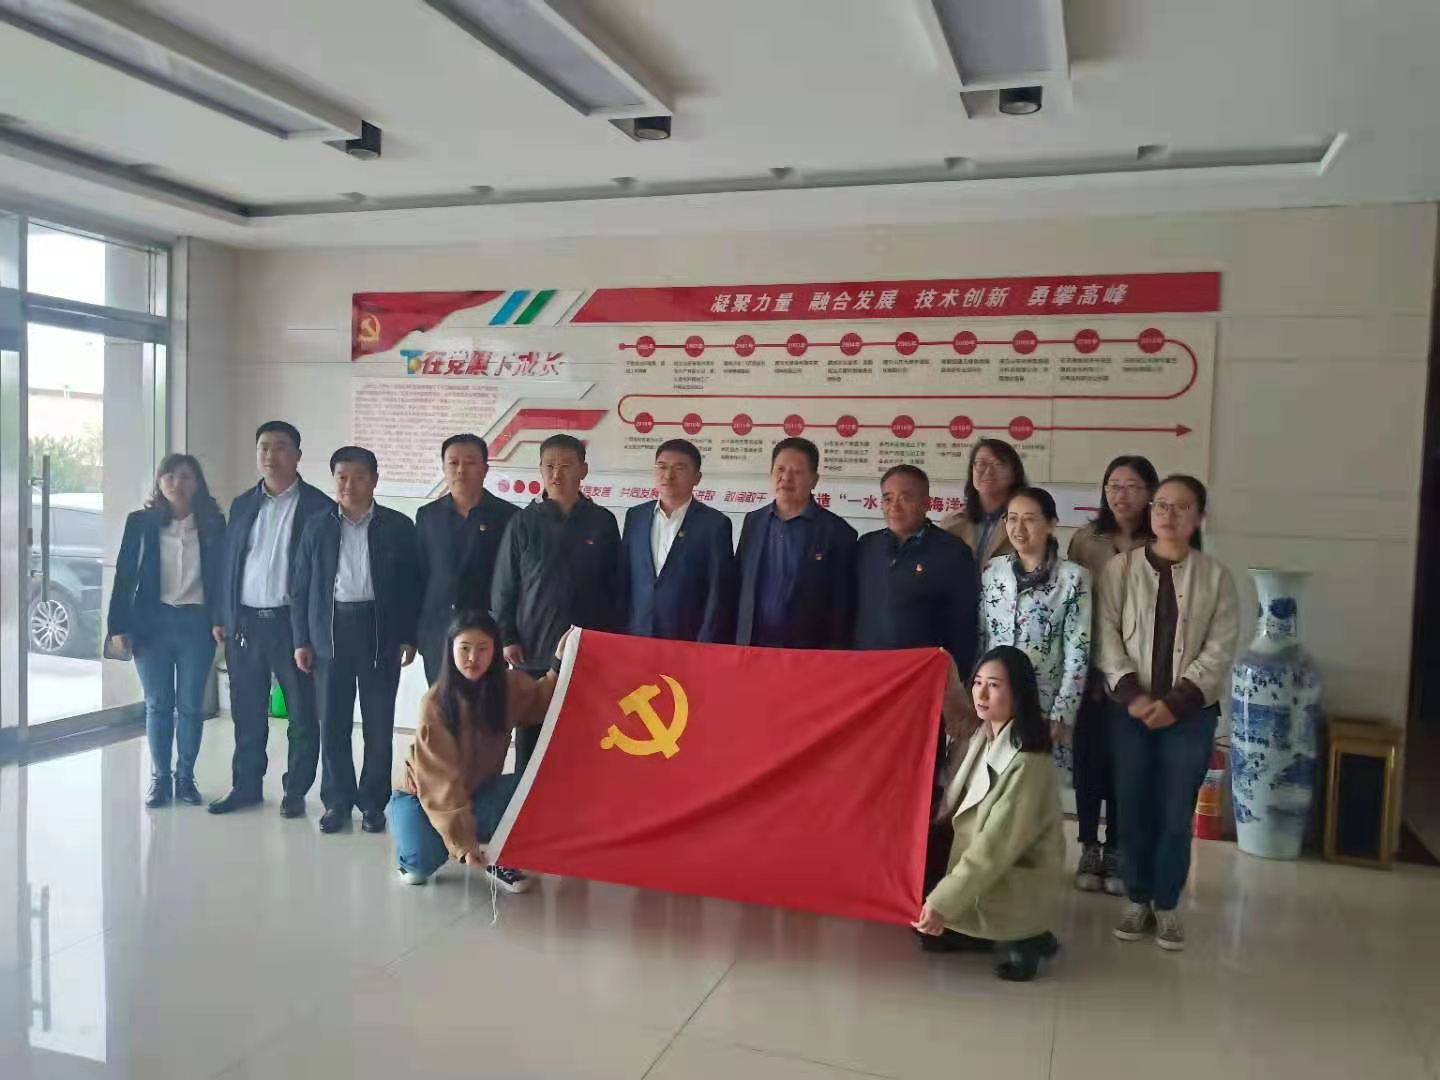 Relevant leaders and experts of Shandong Institute